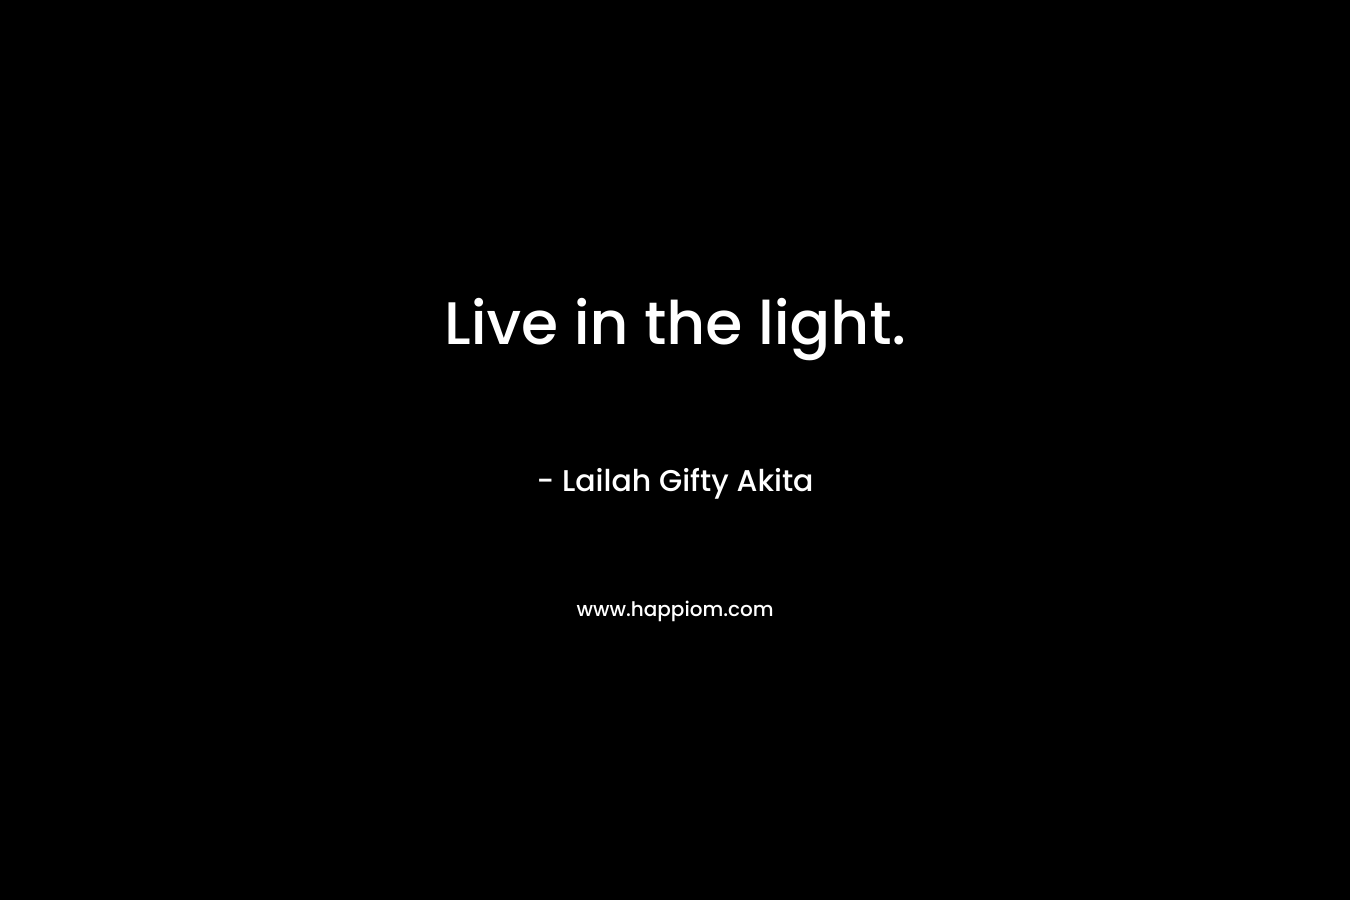 Live in the light.